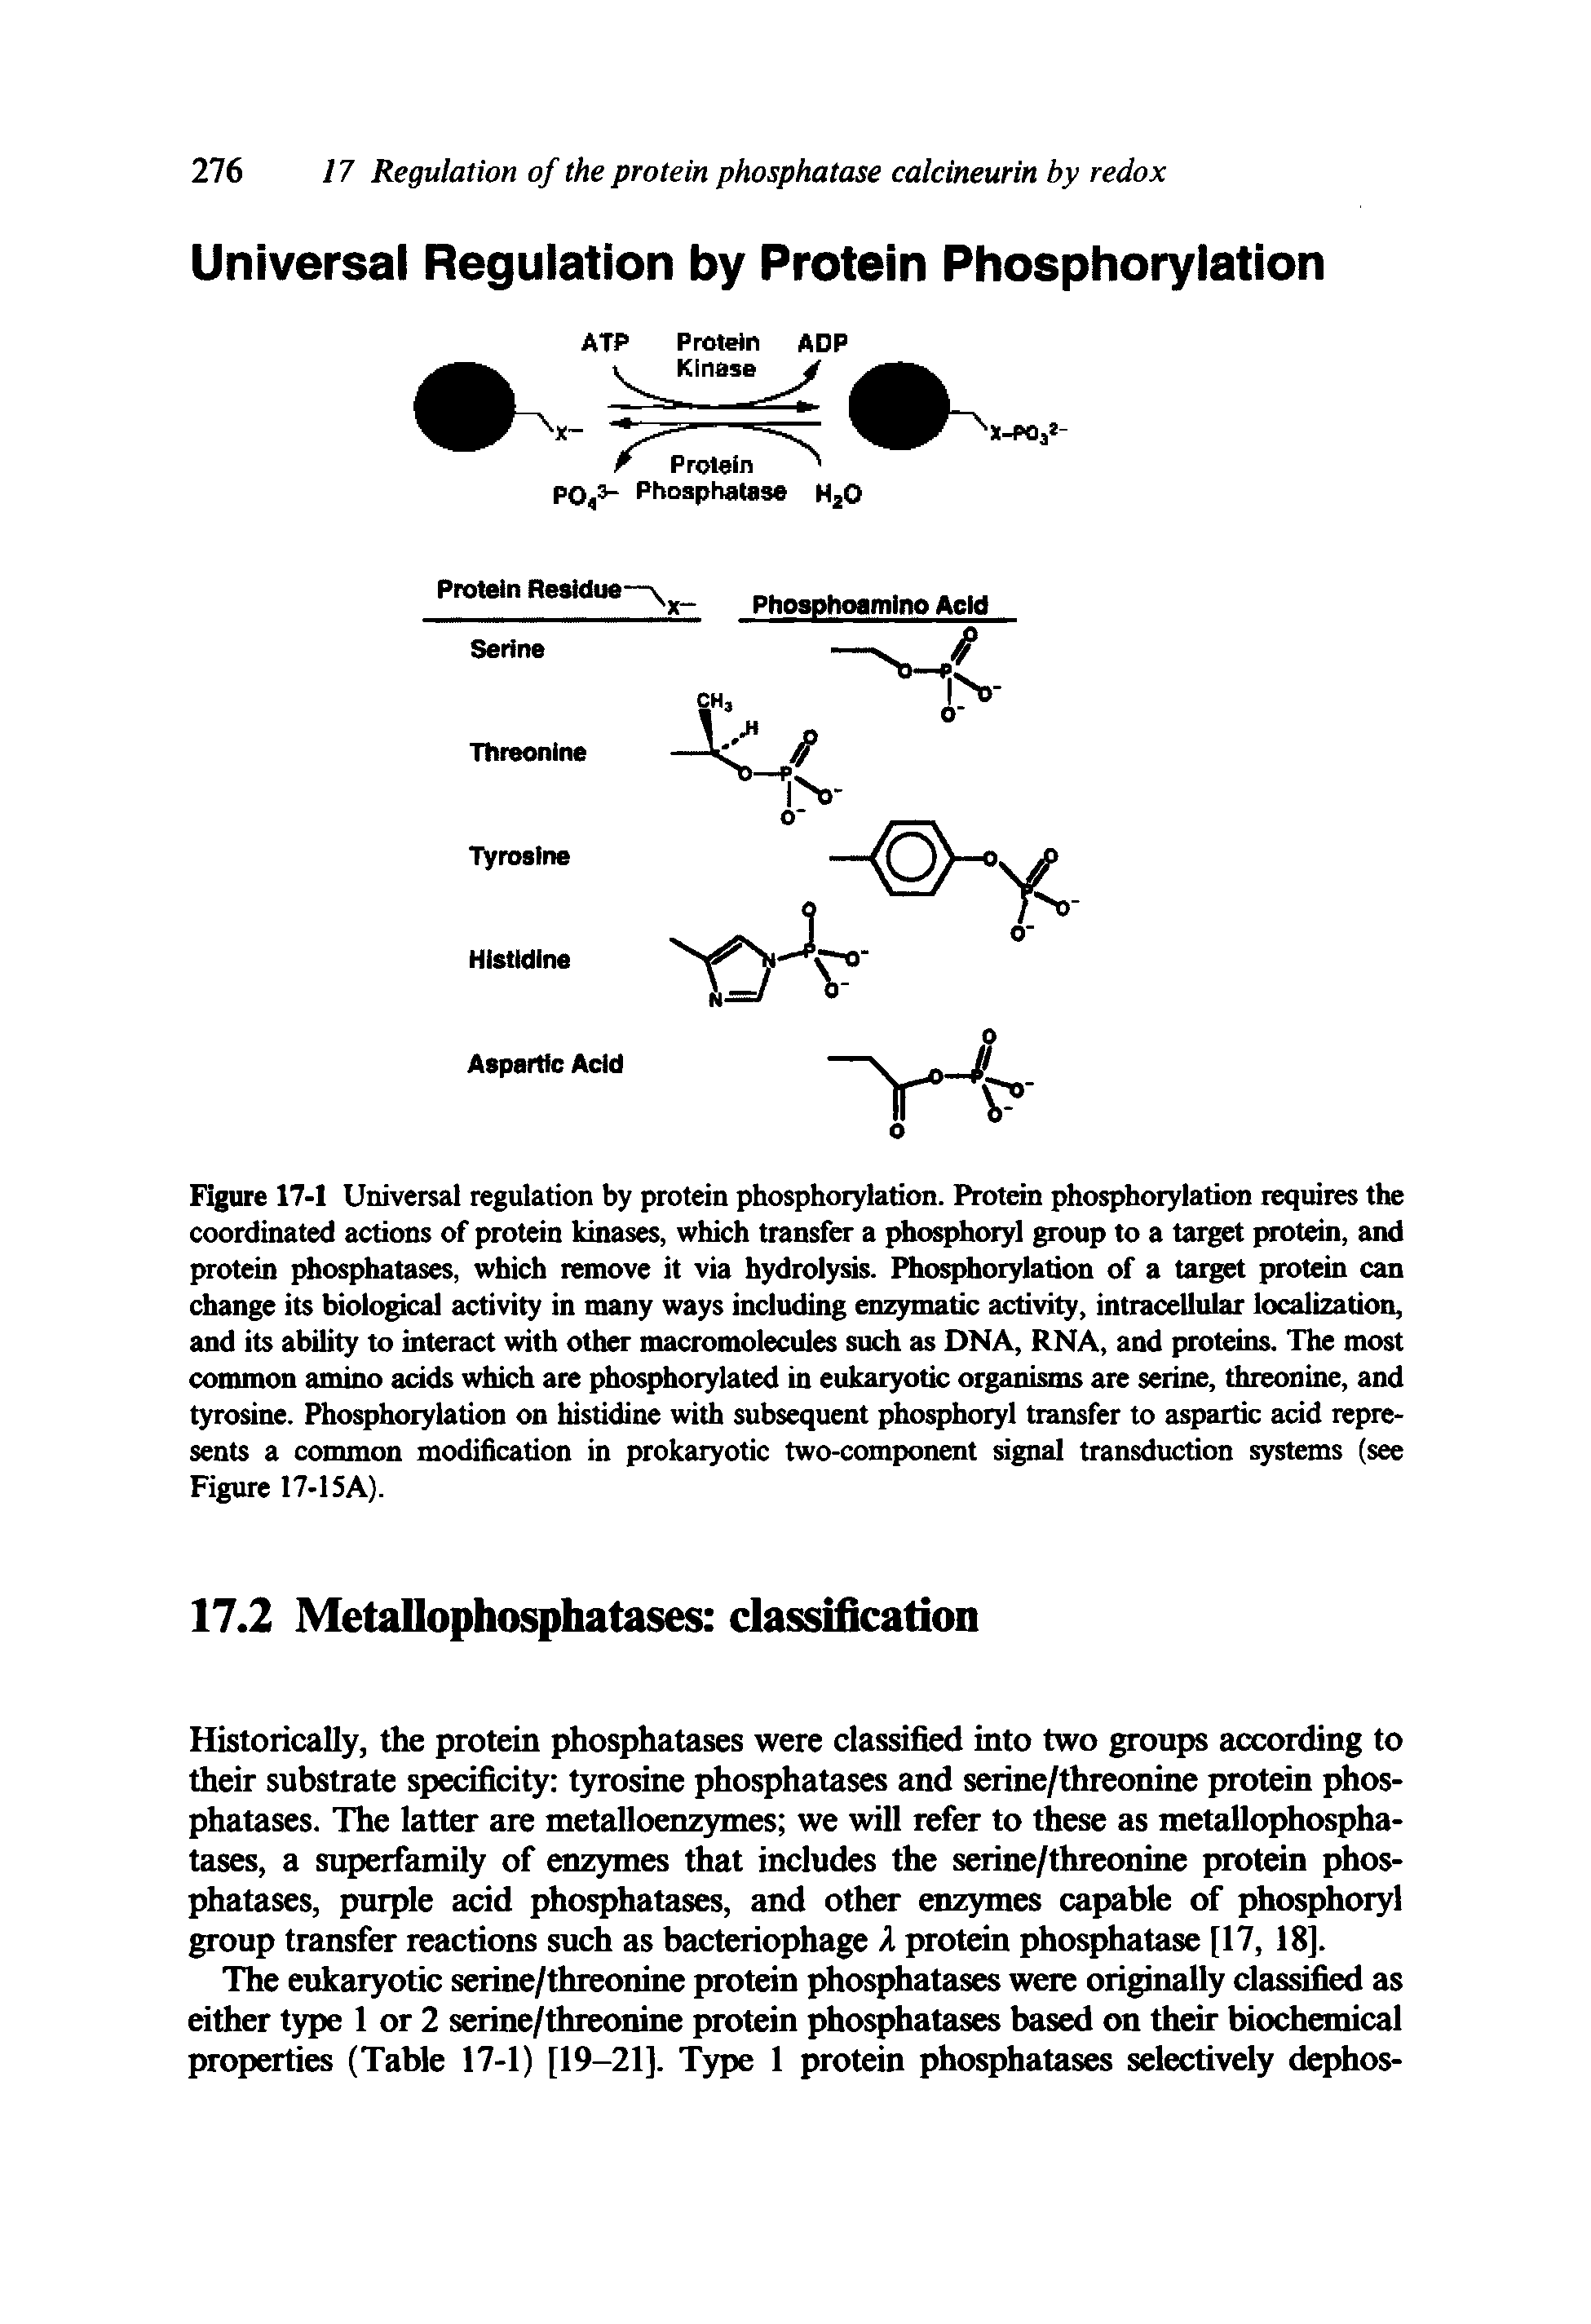 Figure 17-1 Universal regulation by protein phosphorylation. Protein phosphorylation requires the coordinated actions of protein kinases, which transfer a phosphoryl group to a target protein, and protein phosphatases, which remove it via hydrolysis. Phosphorylation of a target protein can change its biological activity in many ways including enzymatic activity, intracellular localization, and its ability to interact with other macromolecules such as DNA, RNA, and proteins. The most common amino acids which are phosphorylated in eukaryotic organisms are serine, threonine, and tyrosine. Phosphorylation on histidine with subsequent phosphoryl transfer to aspartic acid represents a coitunon modification in prokaryotic two-component signal transduction s)rstems (see Figure 17-15A).